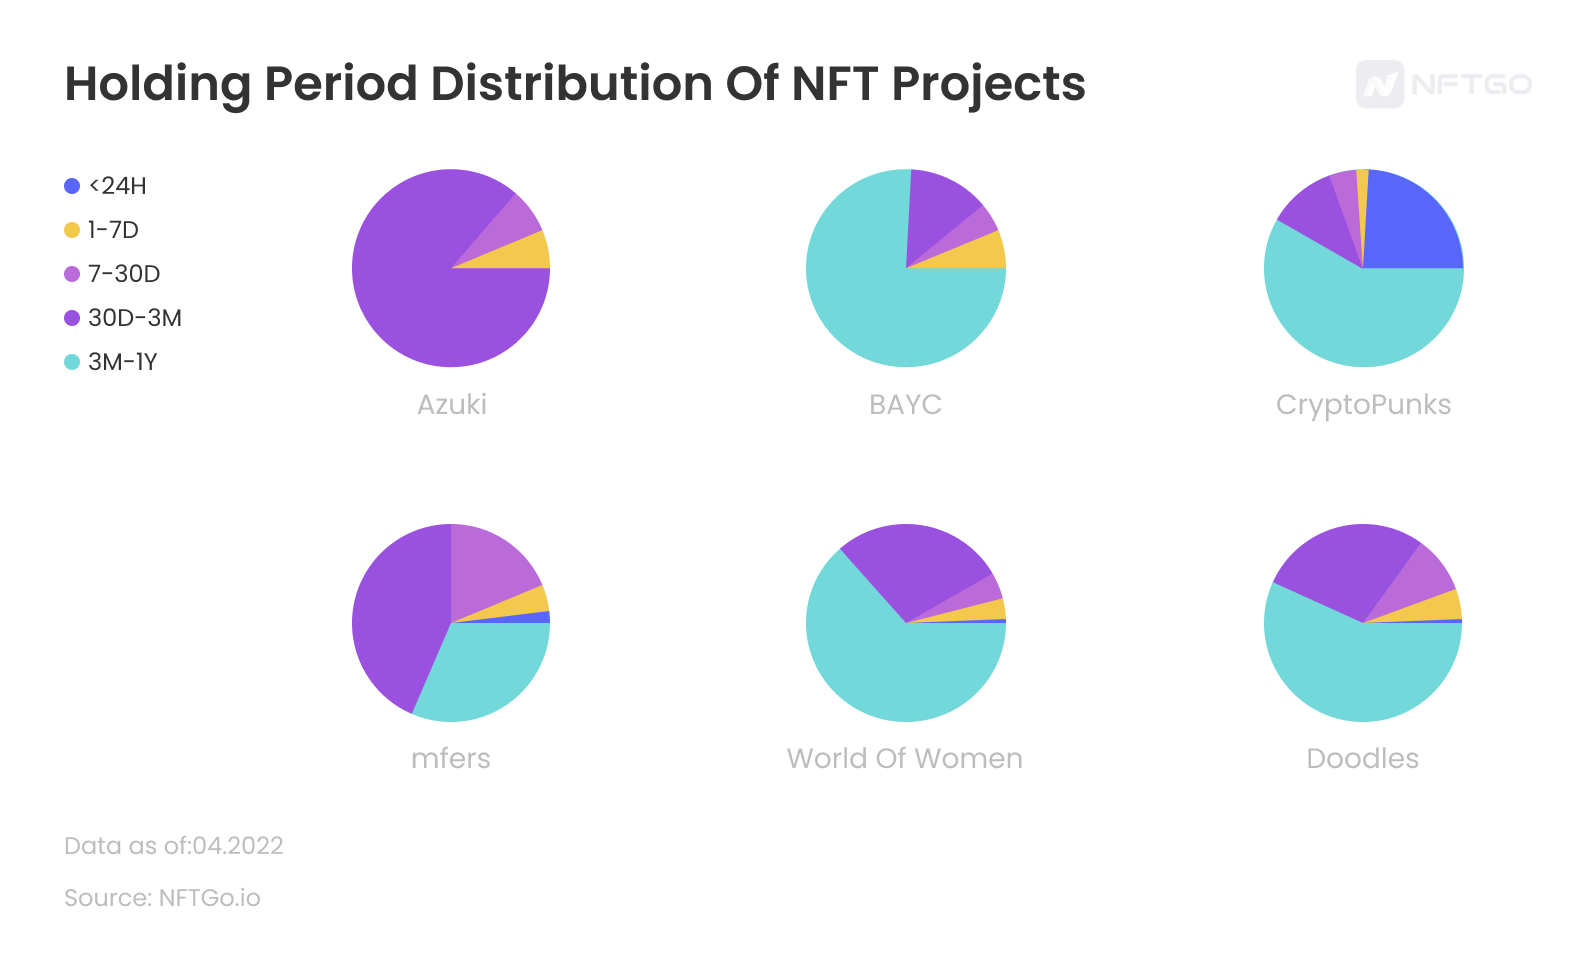 Holding Period Distribution Of NFT Projects; Data source: NFTGo.io